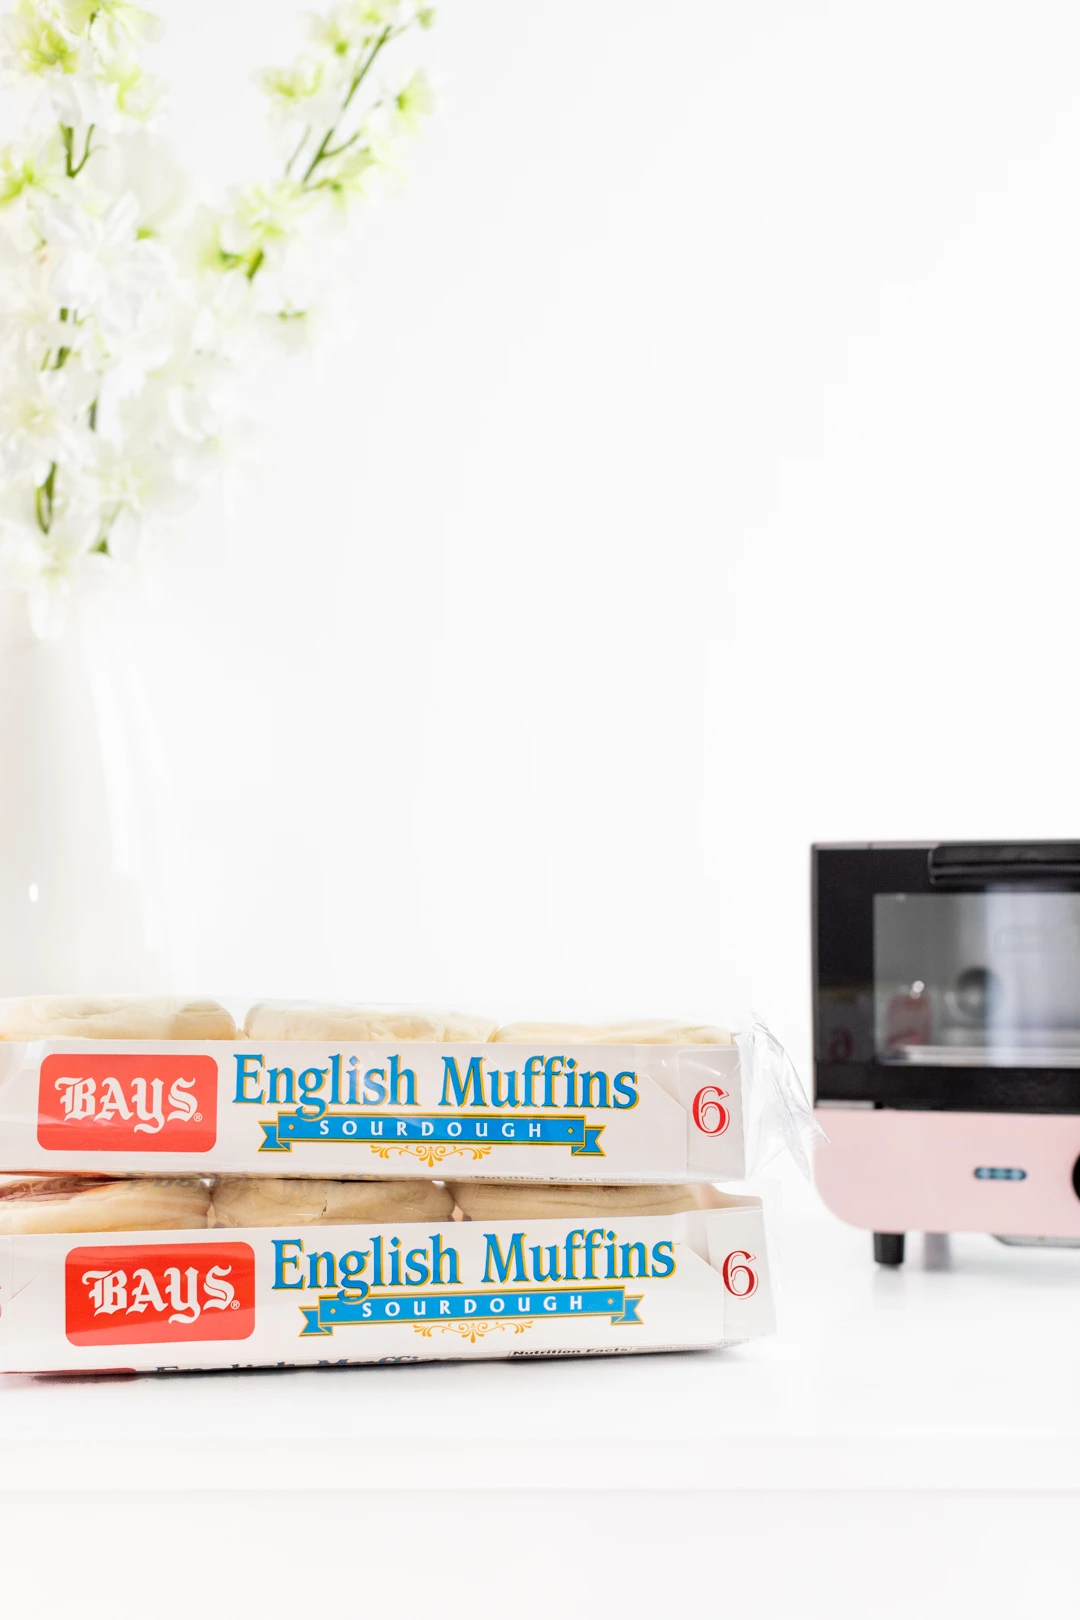 Bays english muffin packages